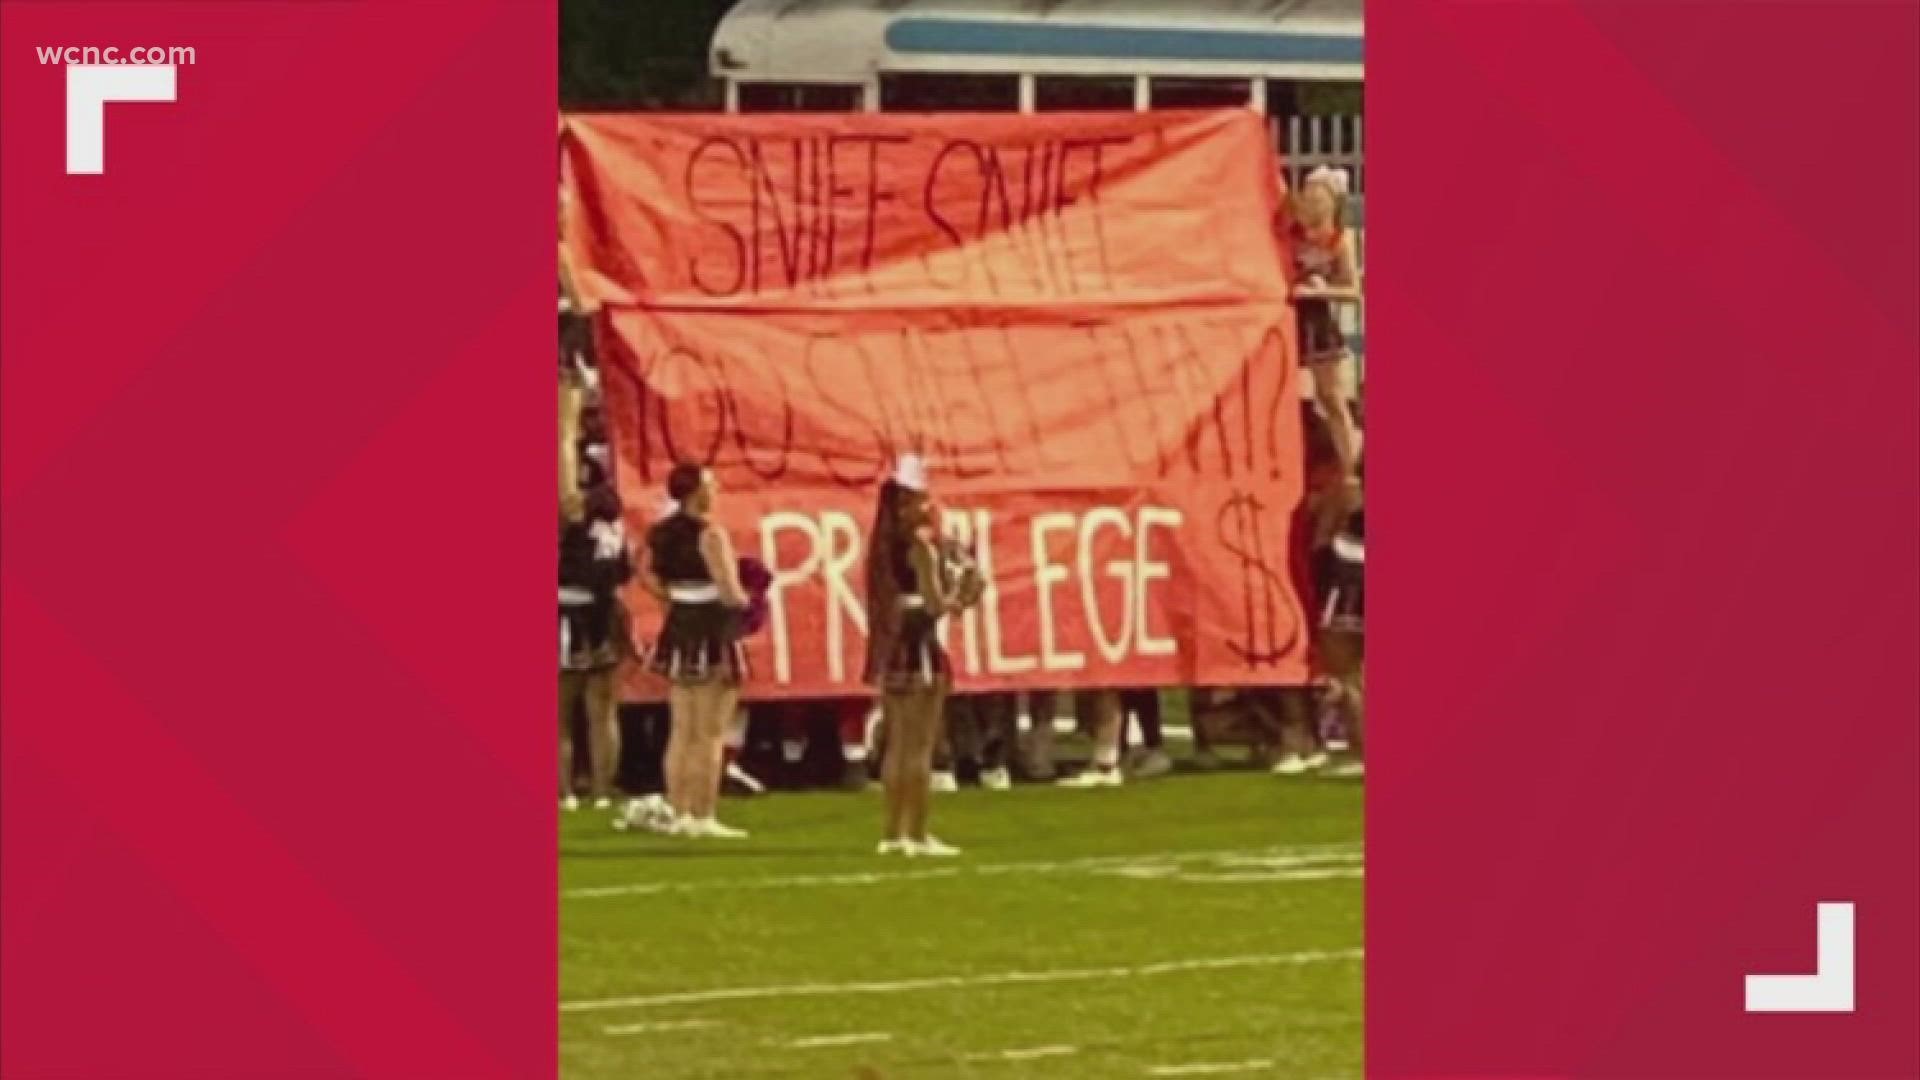 The banner, which was held up before the team ran onto the field, said, "Sniff, sniff. You smell that? $ Privilege $"